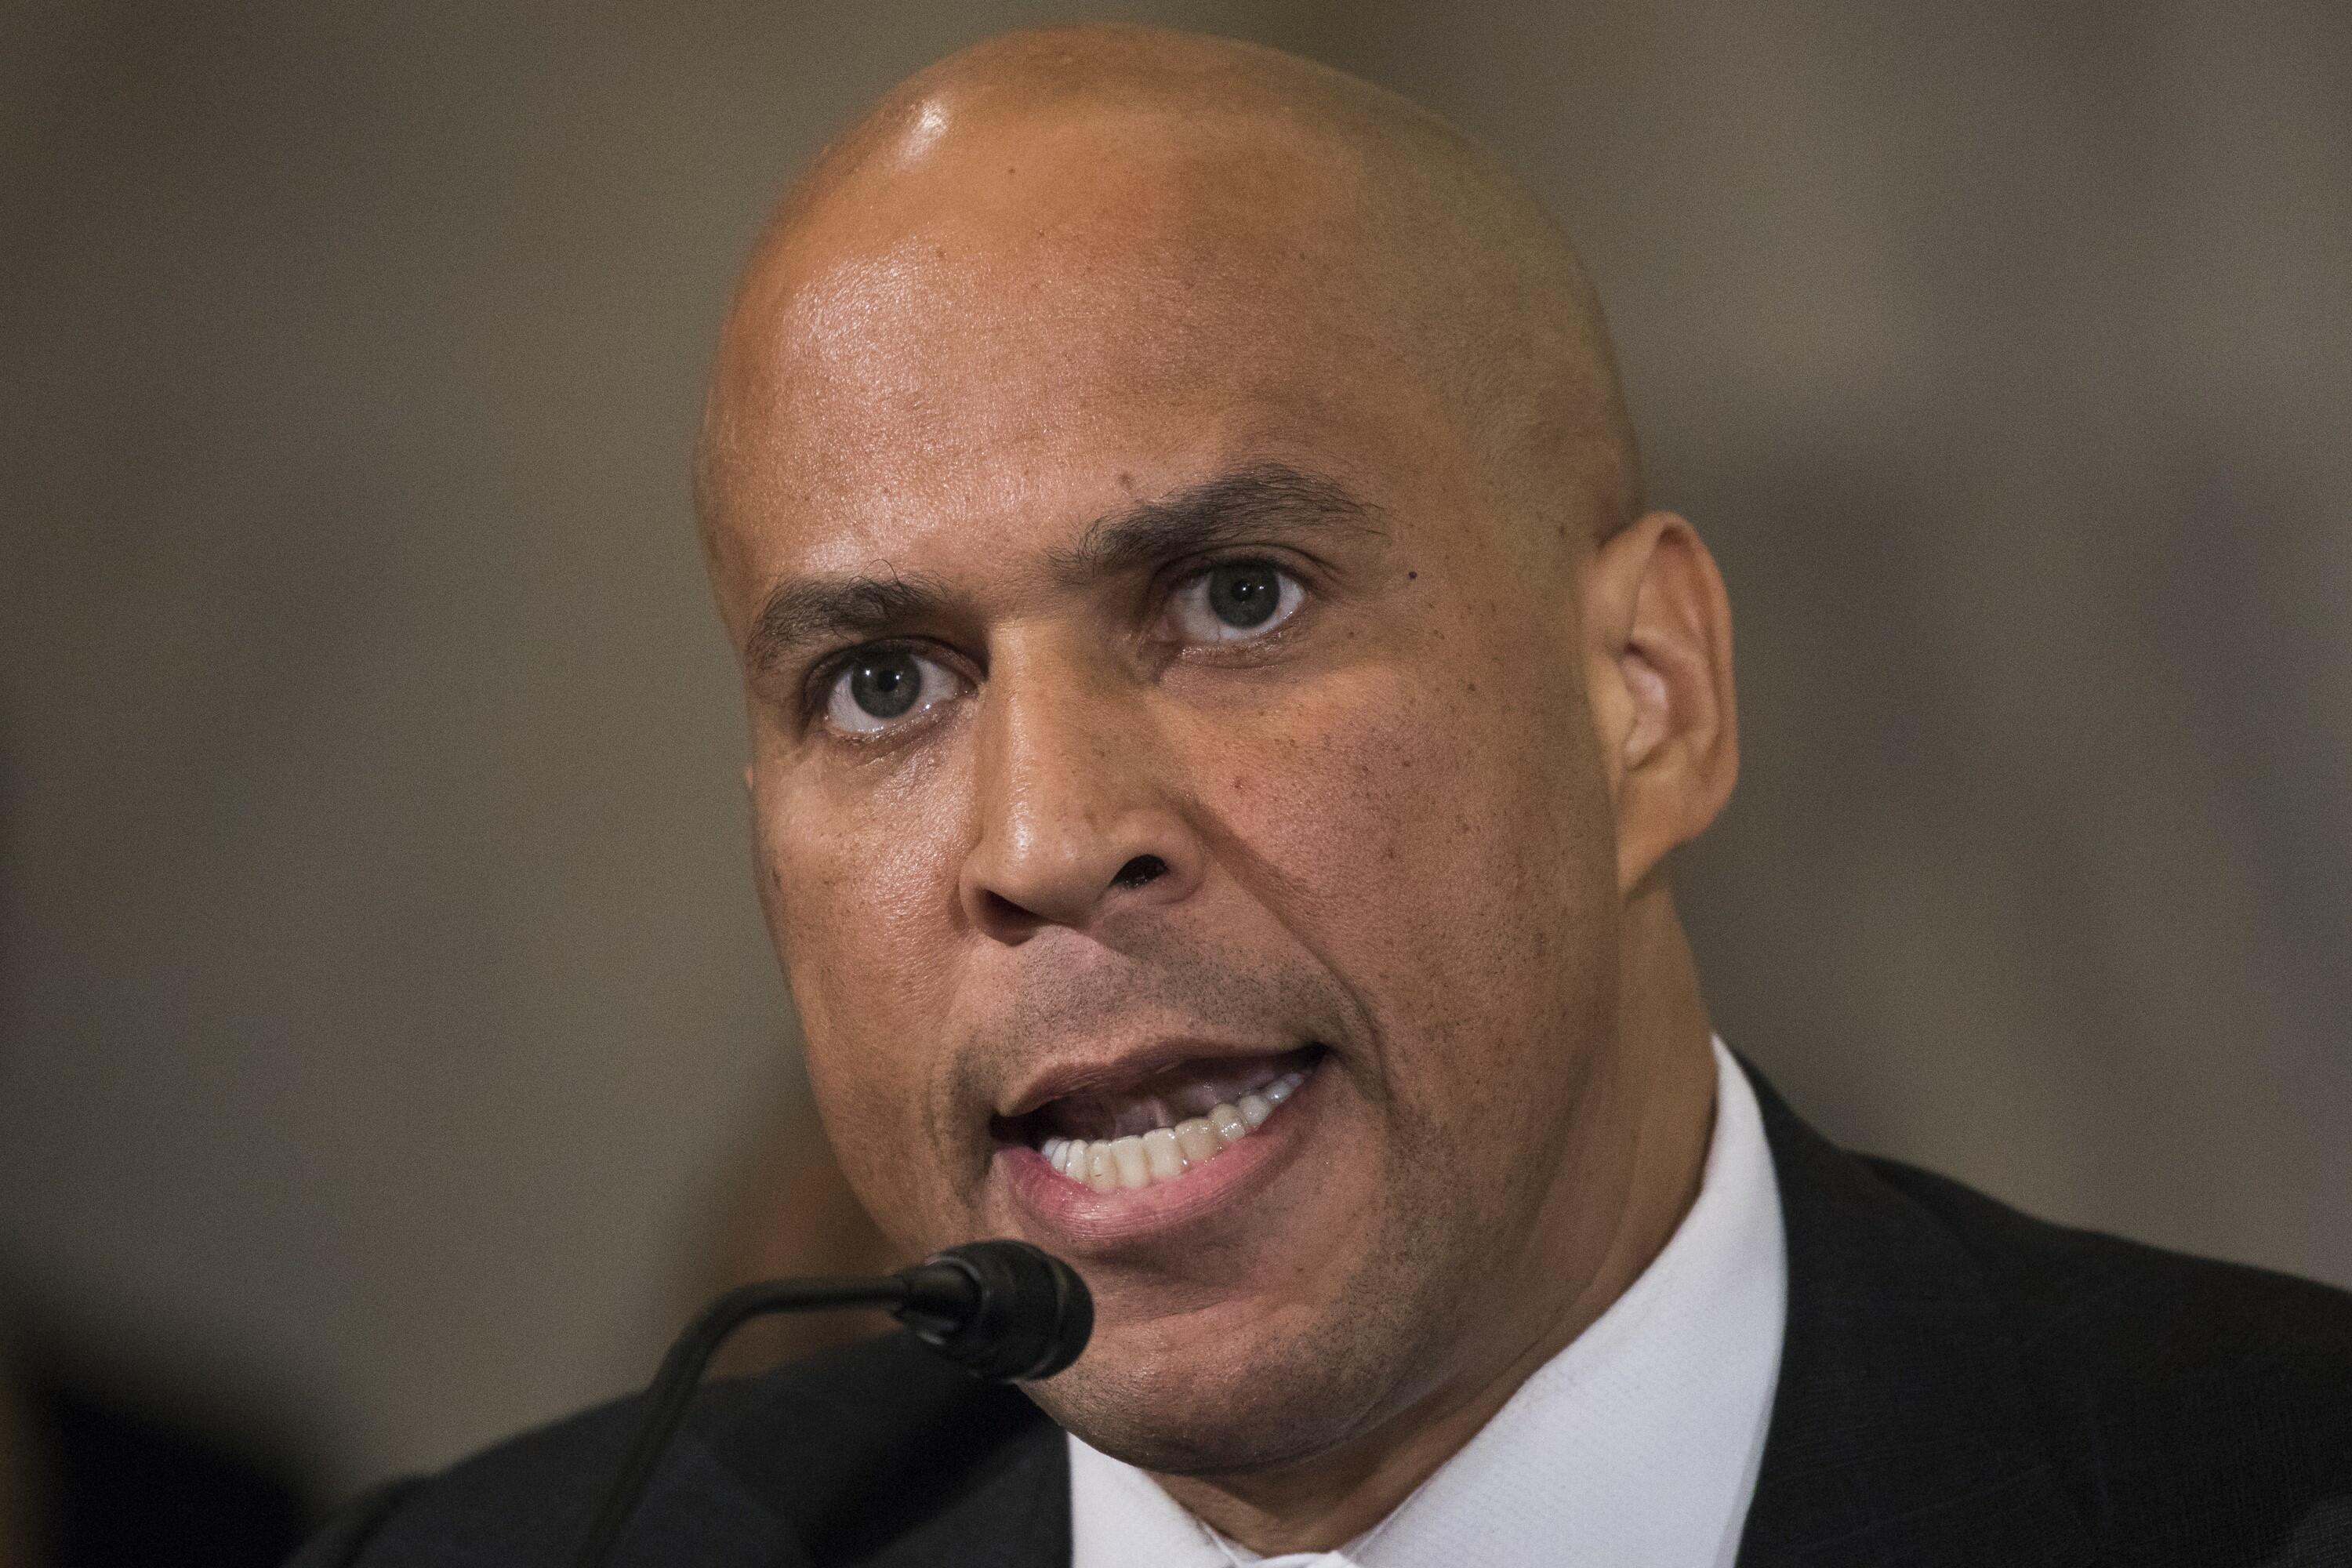 WASHINGTON, USA - January 11: Senator Cory Booker testifies against President-elect Trumps nomination of Senator Jeff Sessions to be Attorney General during the Senate Judiciary Committee confirmation hearing at the U.S. Capitol in Washington, USA on Janu